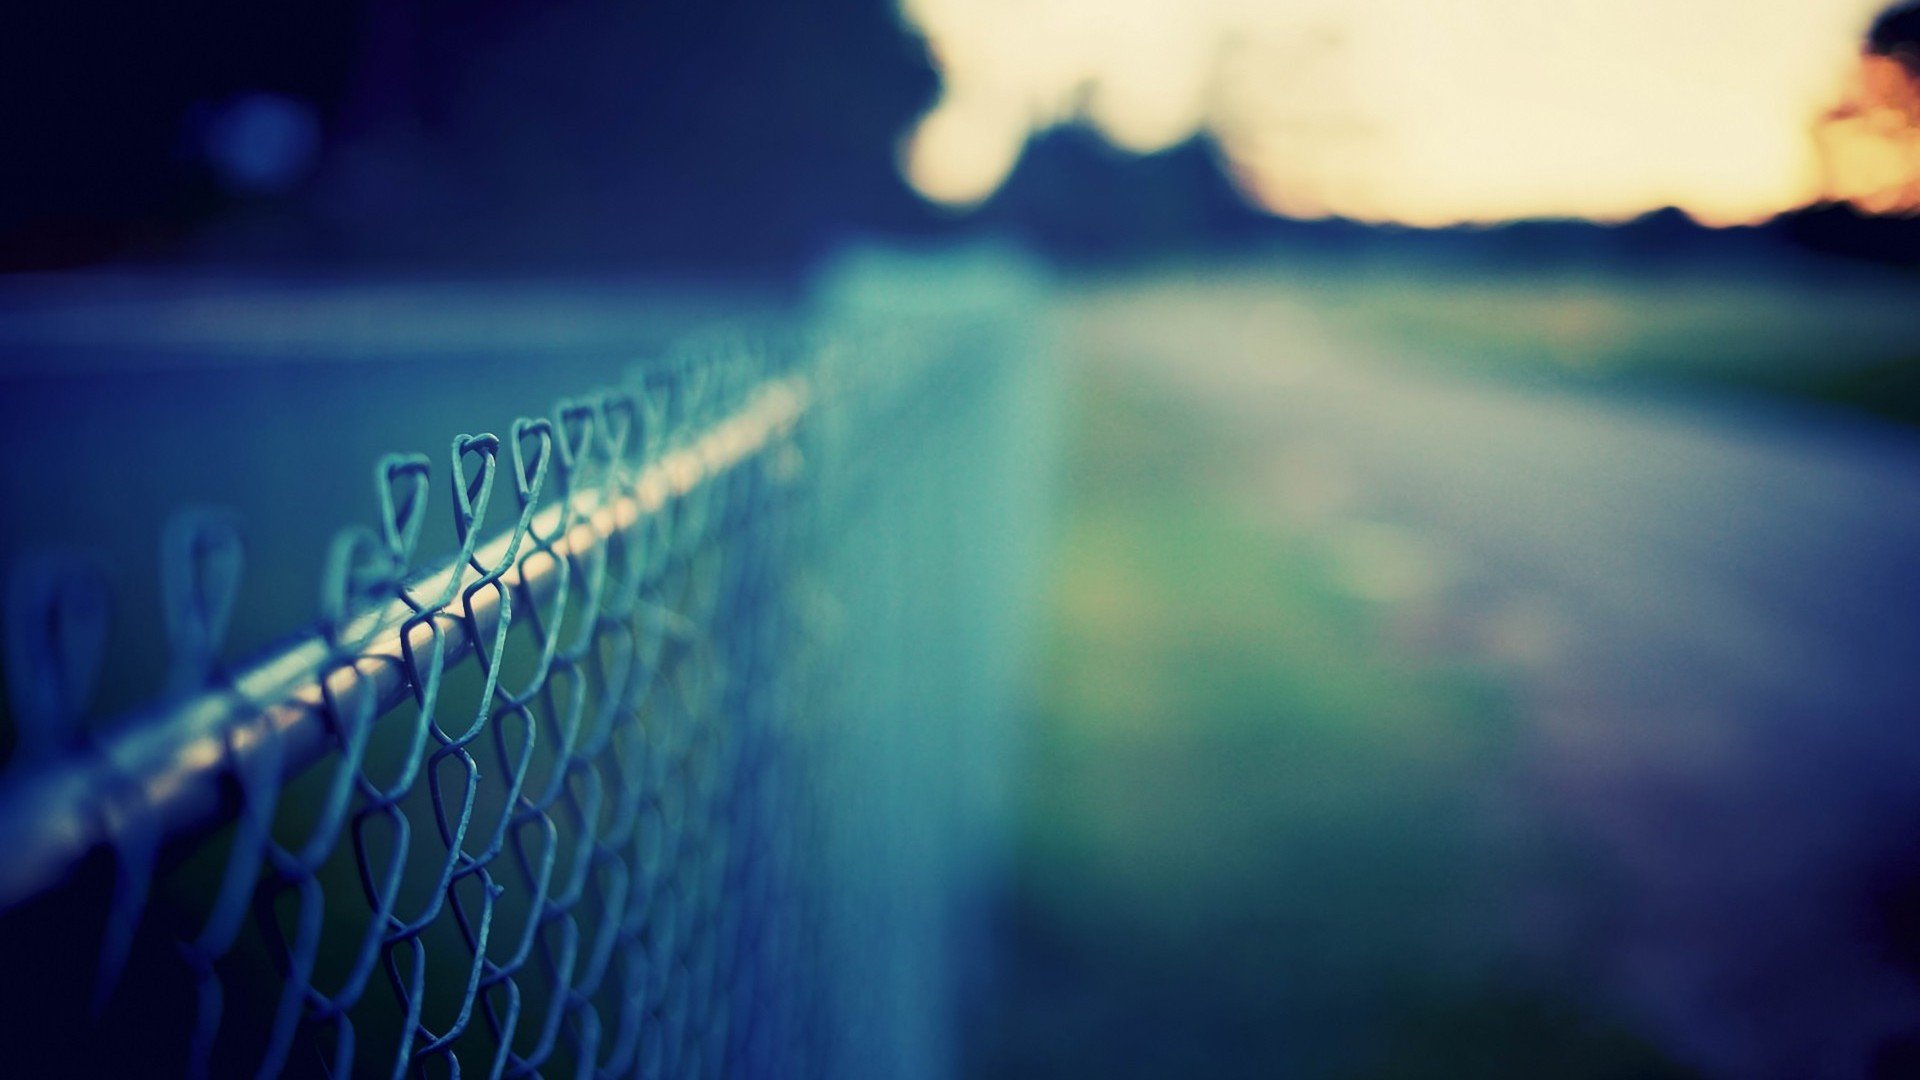 Best Fence wallpaper ID:22942 for High Resolution full hd 1920x1080 PC